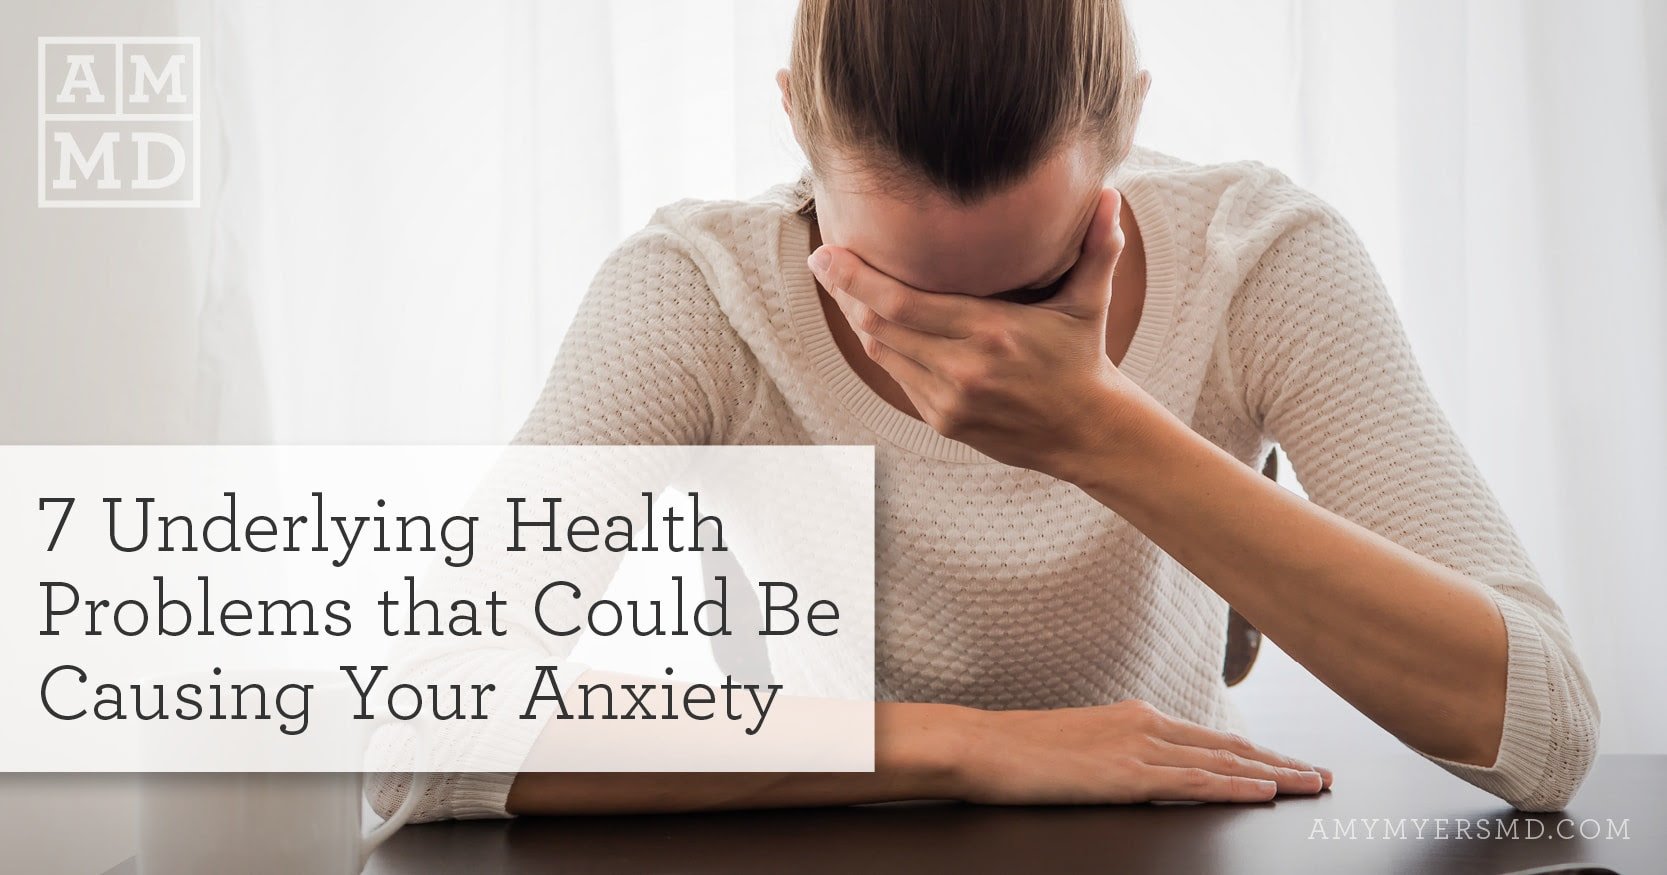 Can Anxiety Cause Nausea And Burping